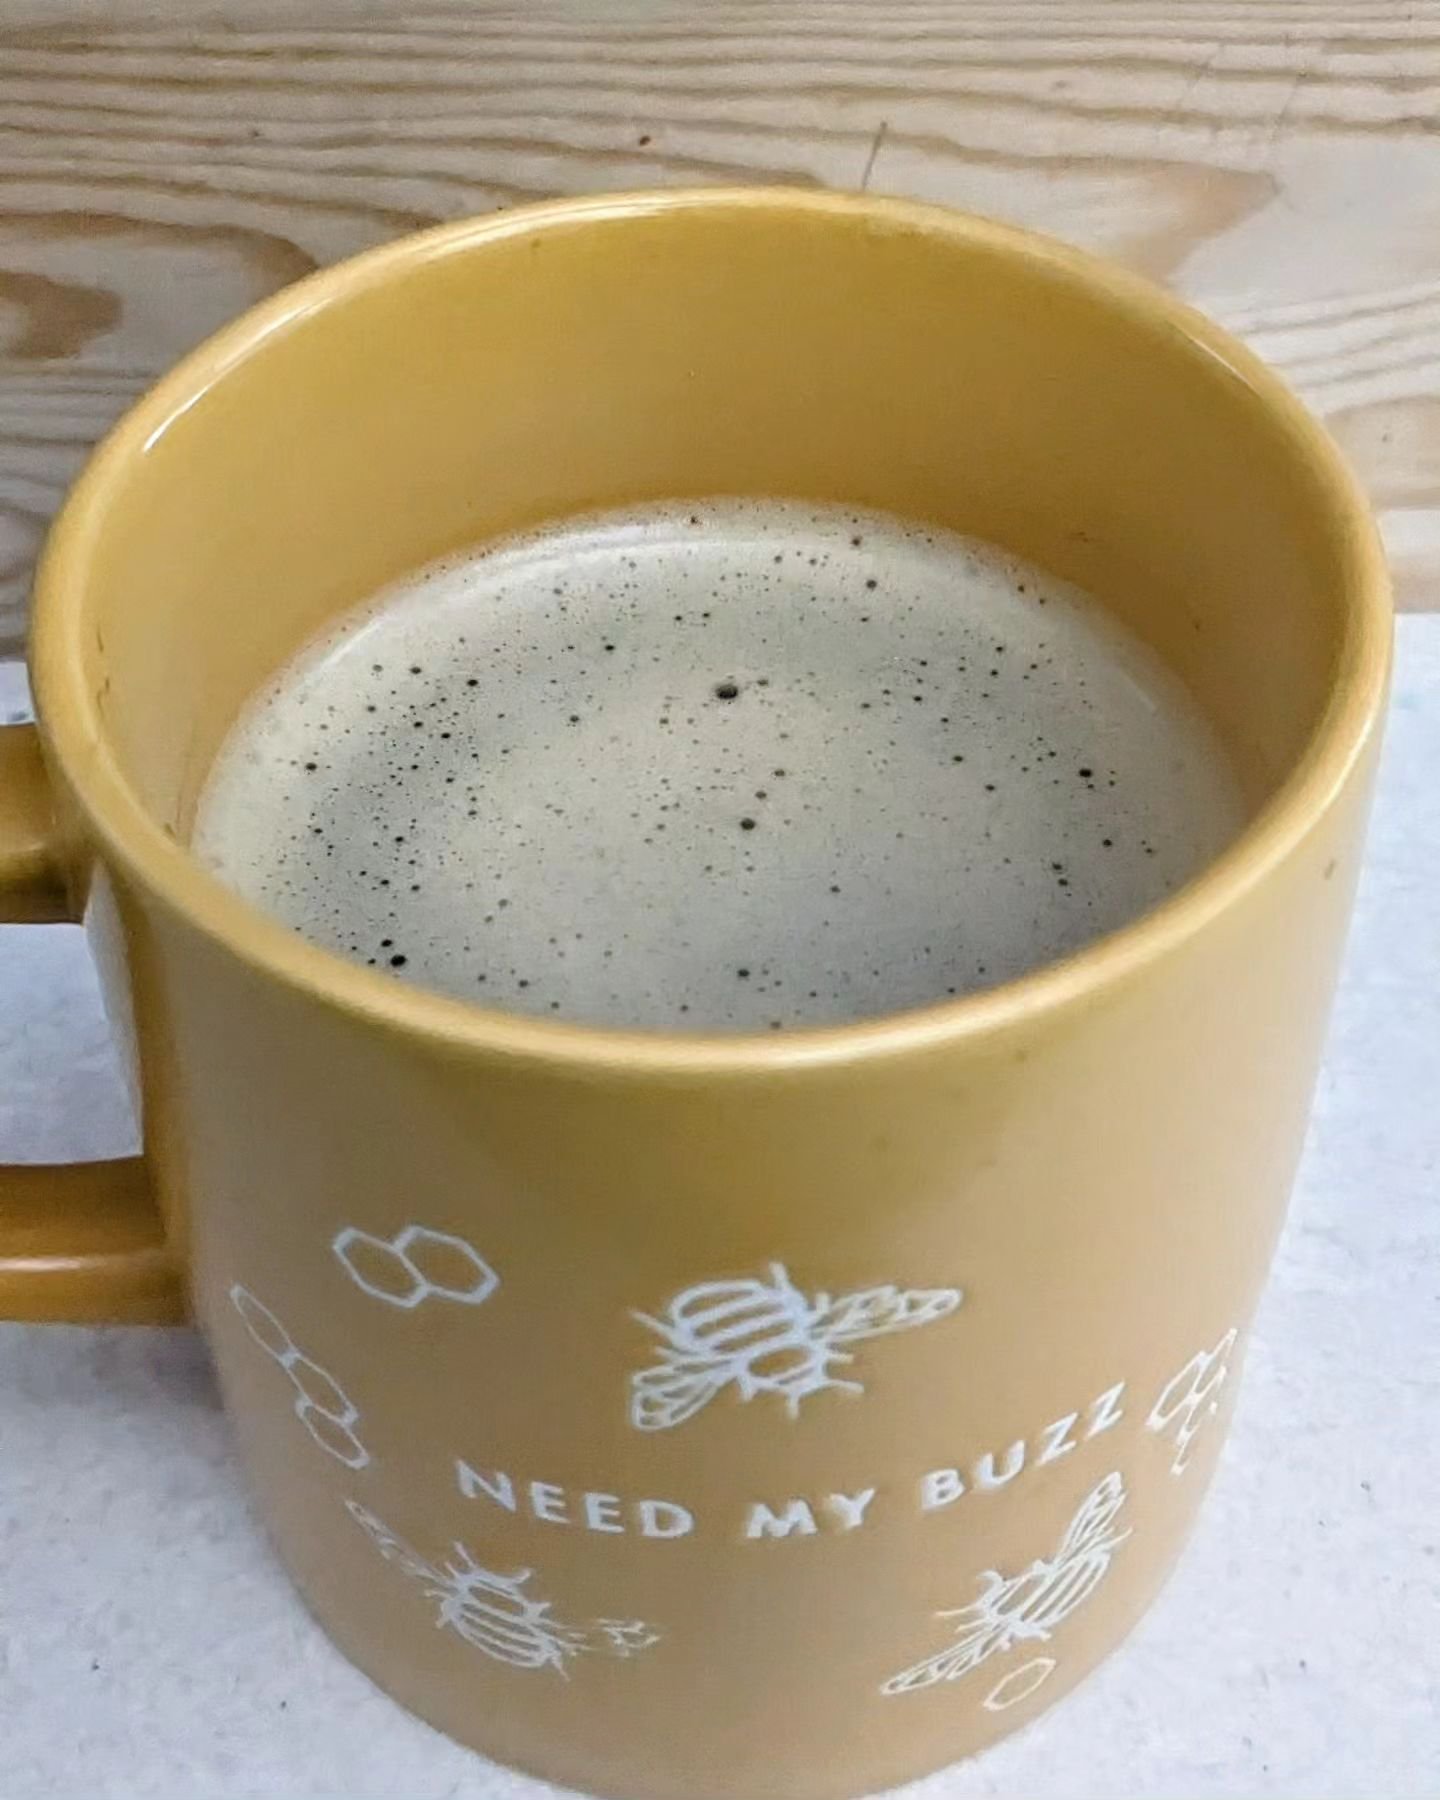 🌞 Most of us have a morning routine that gets the day going.

🌼 This dandelion &amp; yellow dock root latte is one of my favorites.

☕ I call it an iron-rich latt&eacute;.

🌿 Dandelion root not only supports  liver function, but it also adds phyto